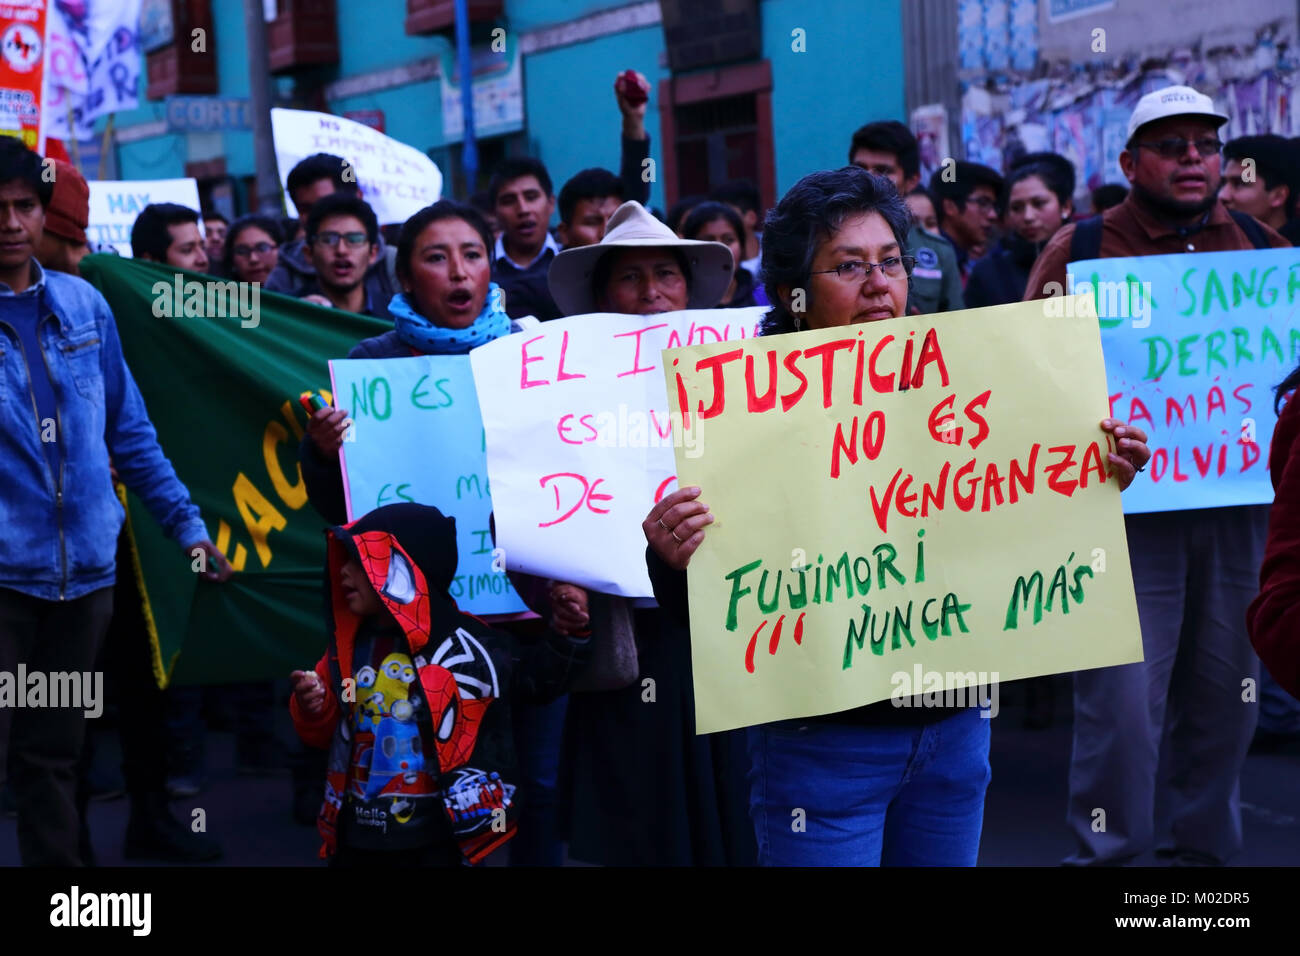 A woman holds a placard demanding justice during a march protesting against pardon granted former president Alberto Fujimori, Cusco, Peru Stock Photo